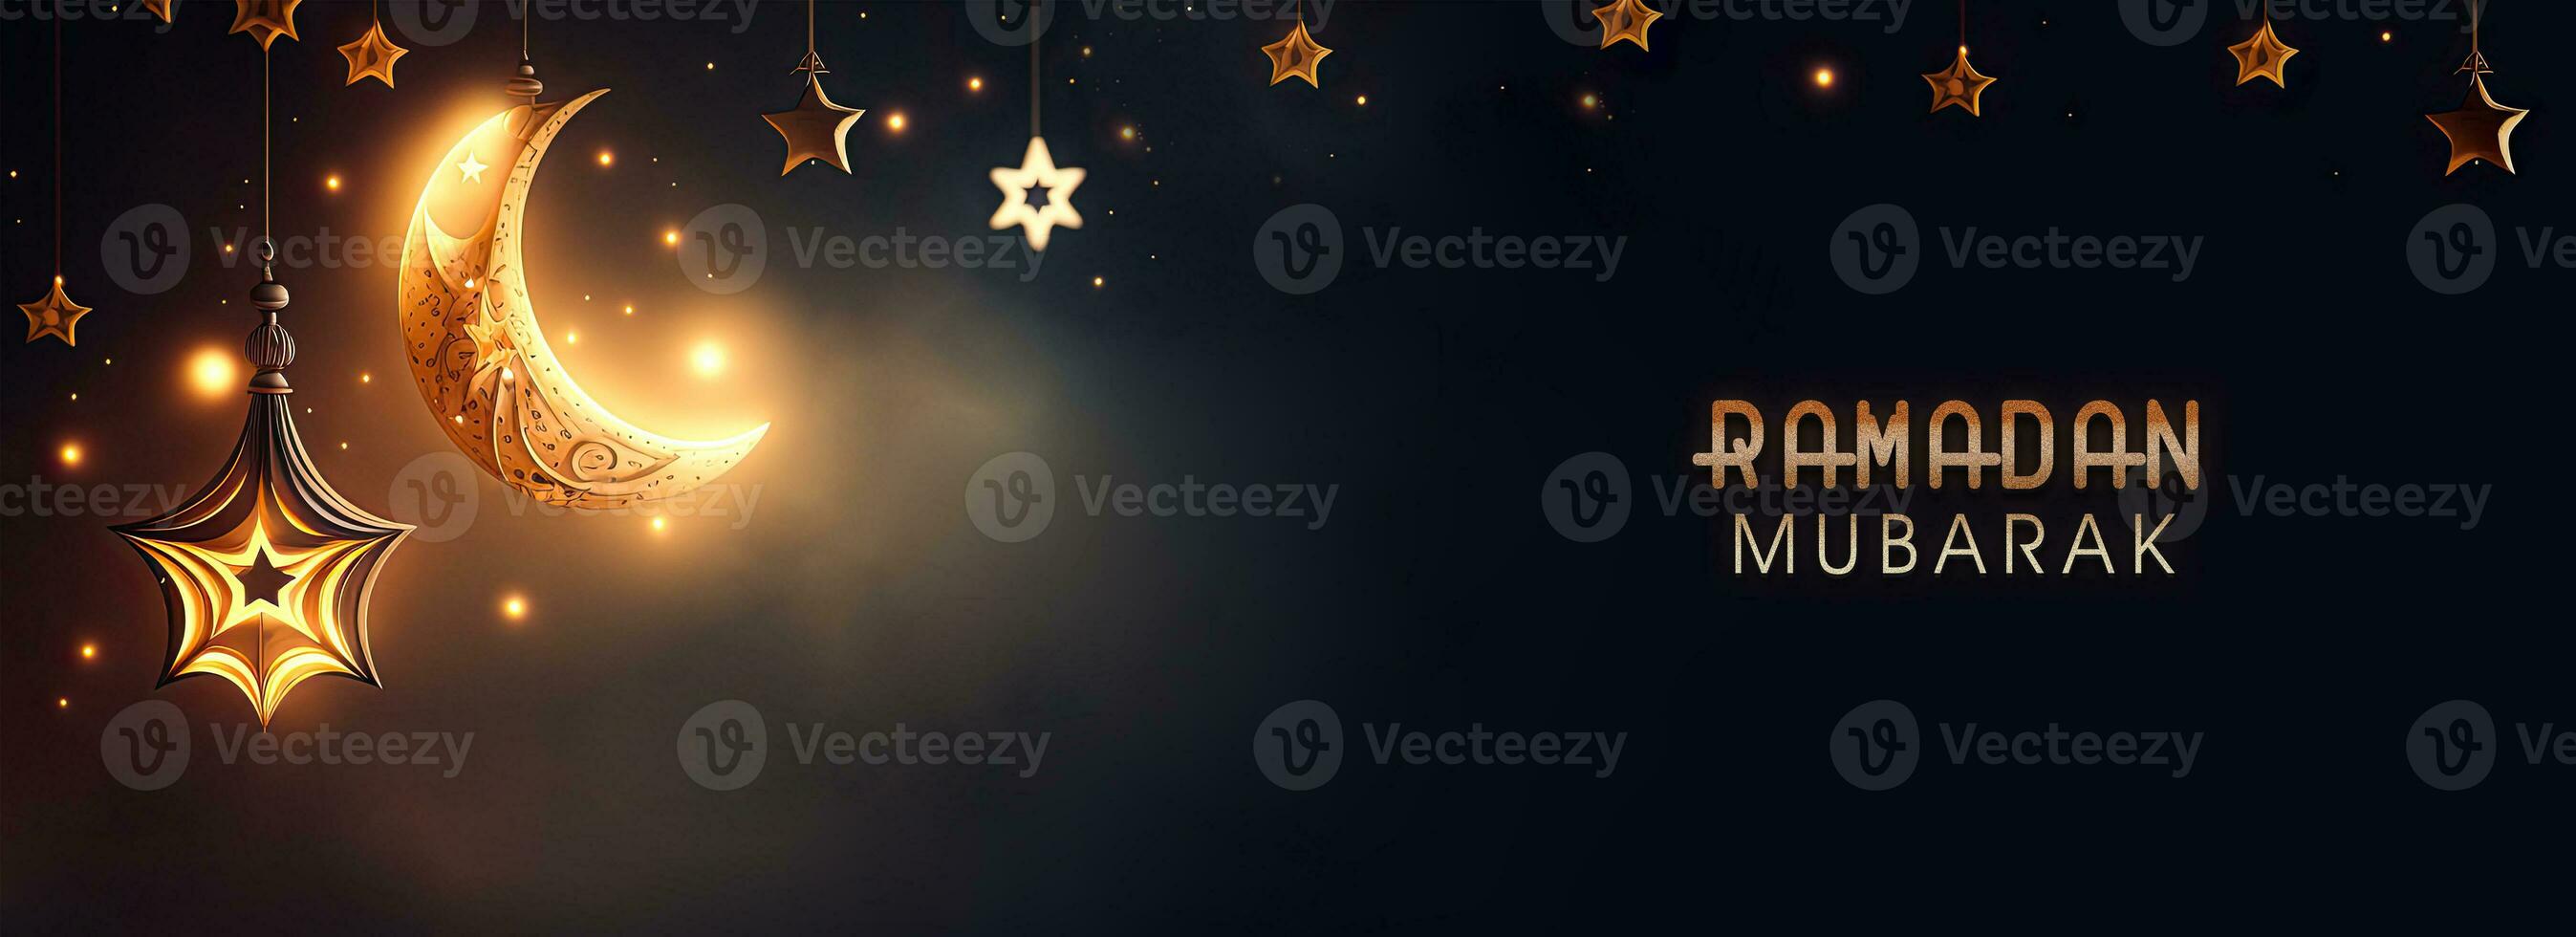 Ramadan Mubarak Banner Design With 3D Render of Shiny Golden Crescent Moon And Hanging Stars Decorated Background. photo